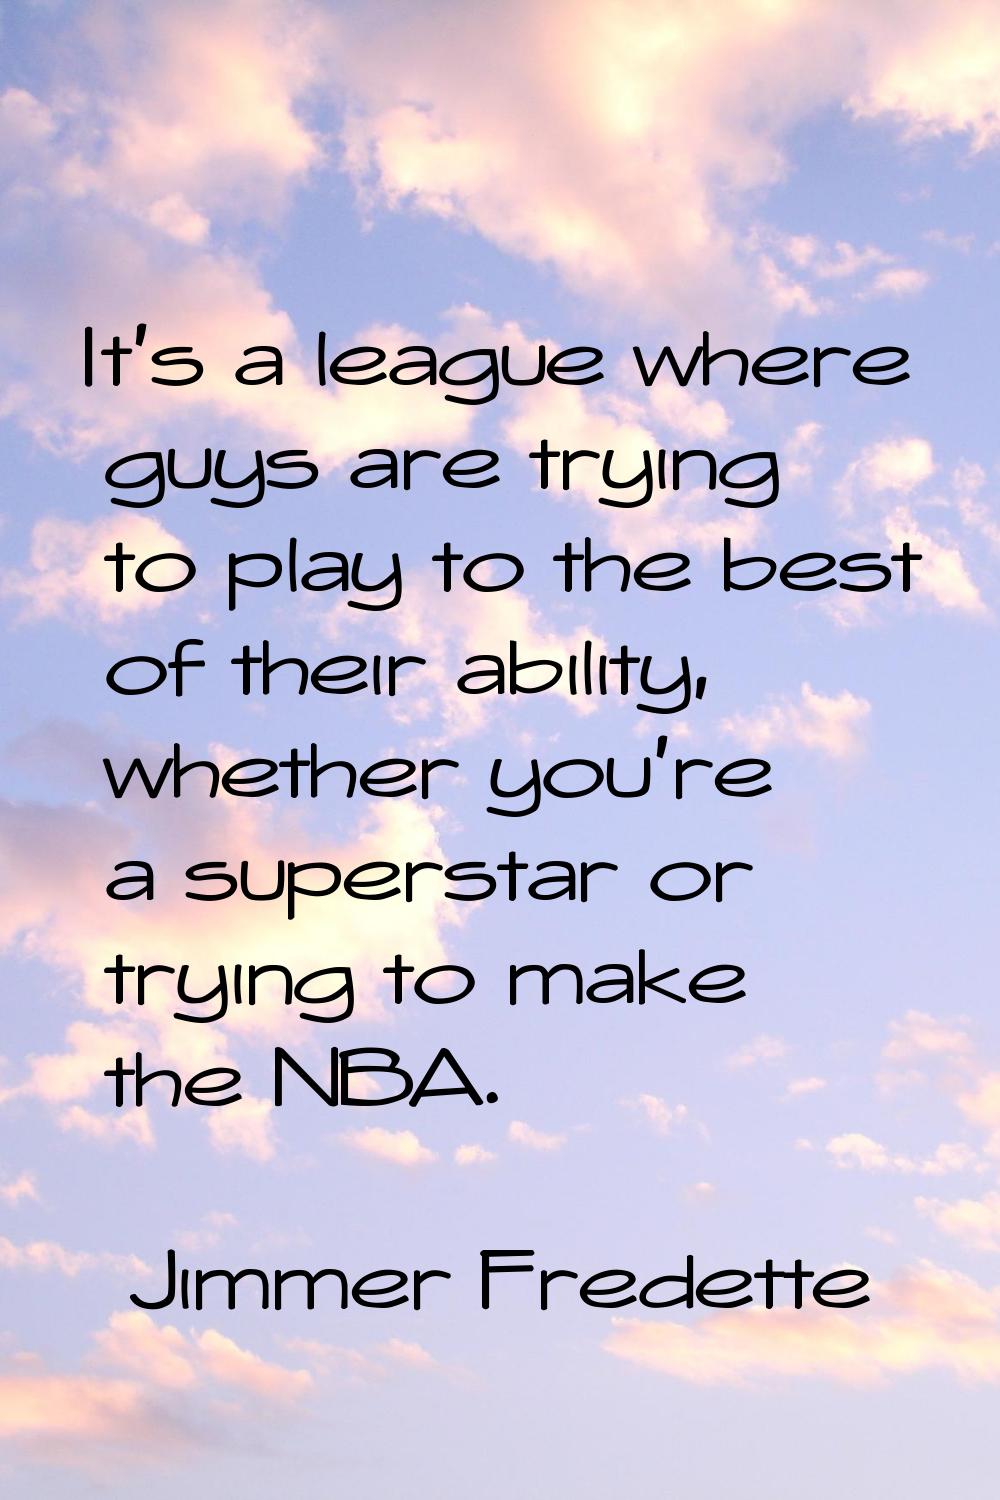 It's a league where guys are trying to play to the best of their ability, whether you're a supersta